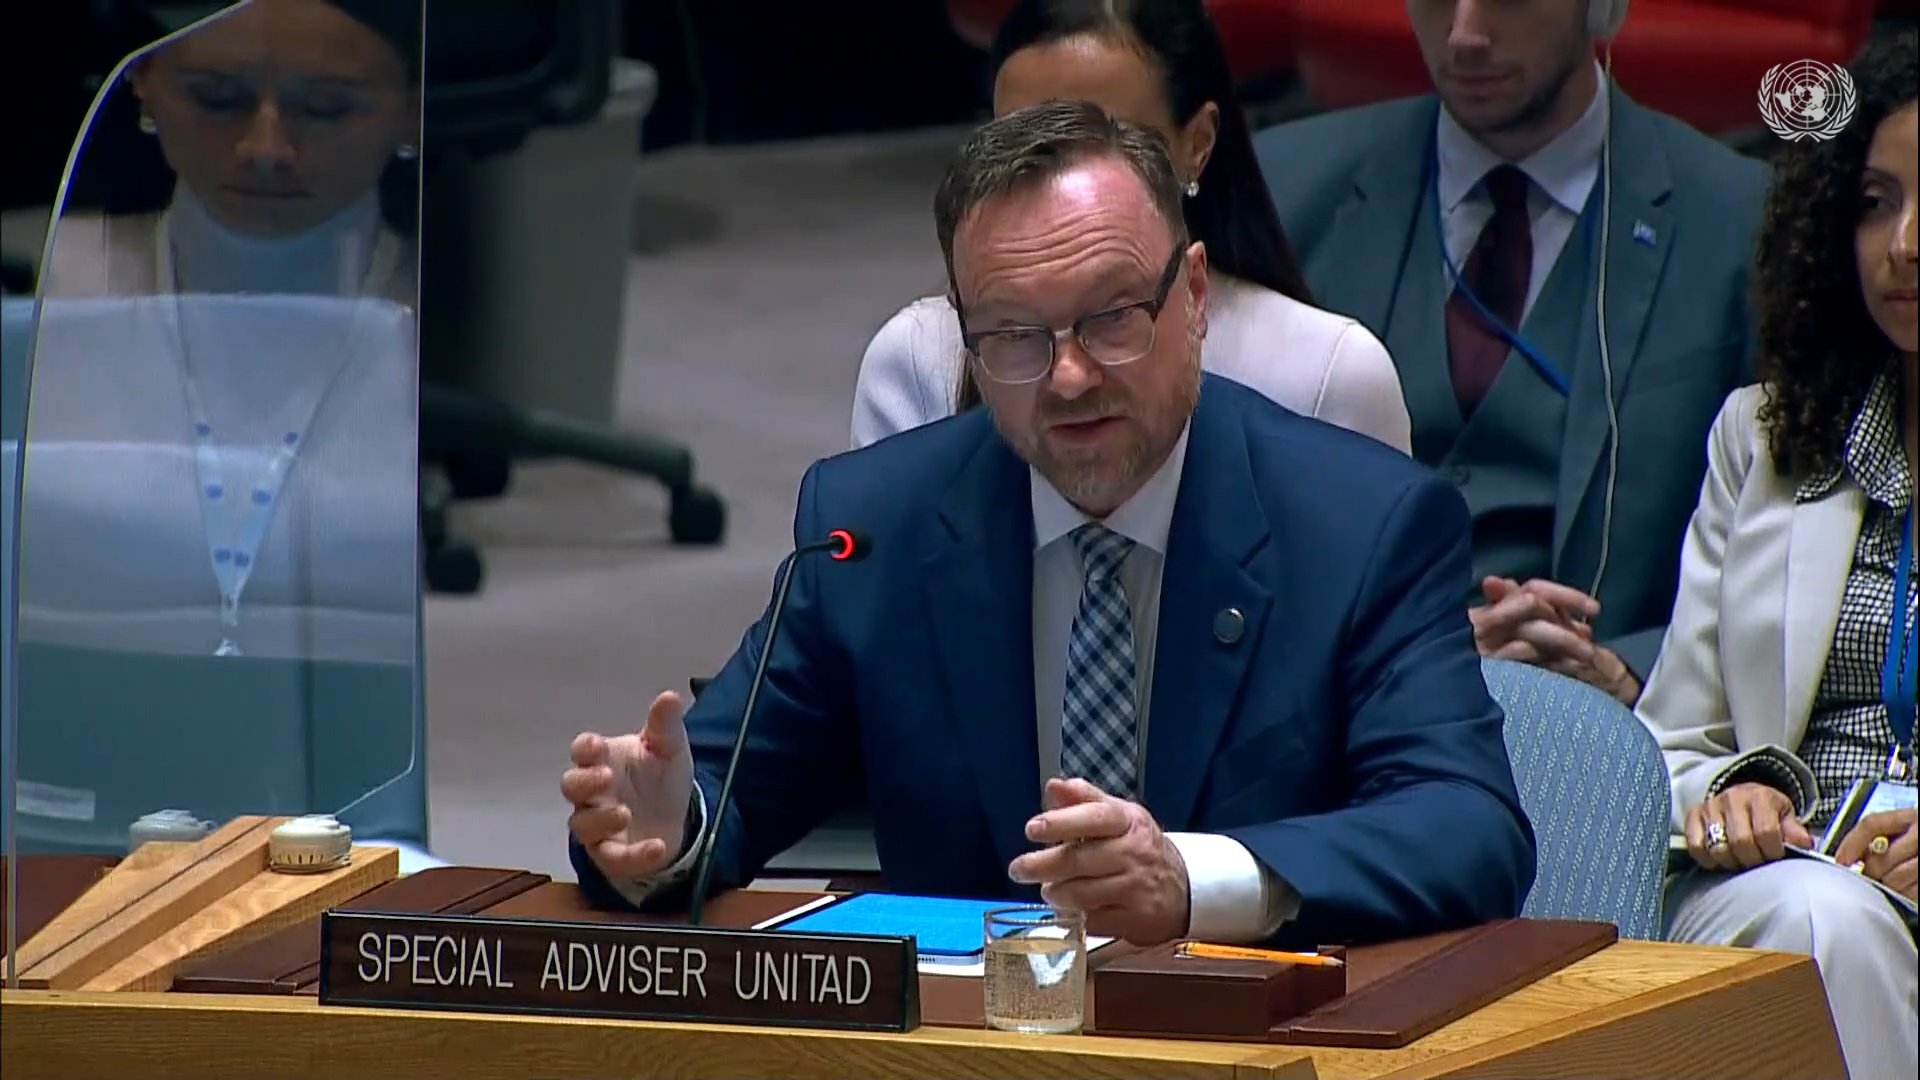 ‘Great progress’ being made bringing Da’esh/ISIL terrorists to justice, Security Council hears